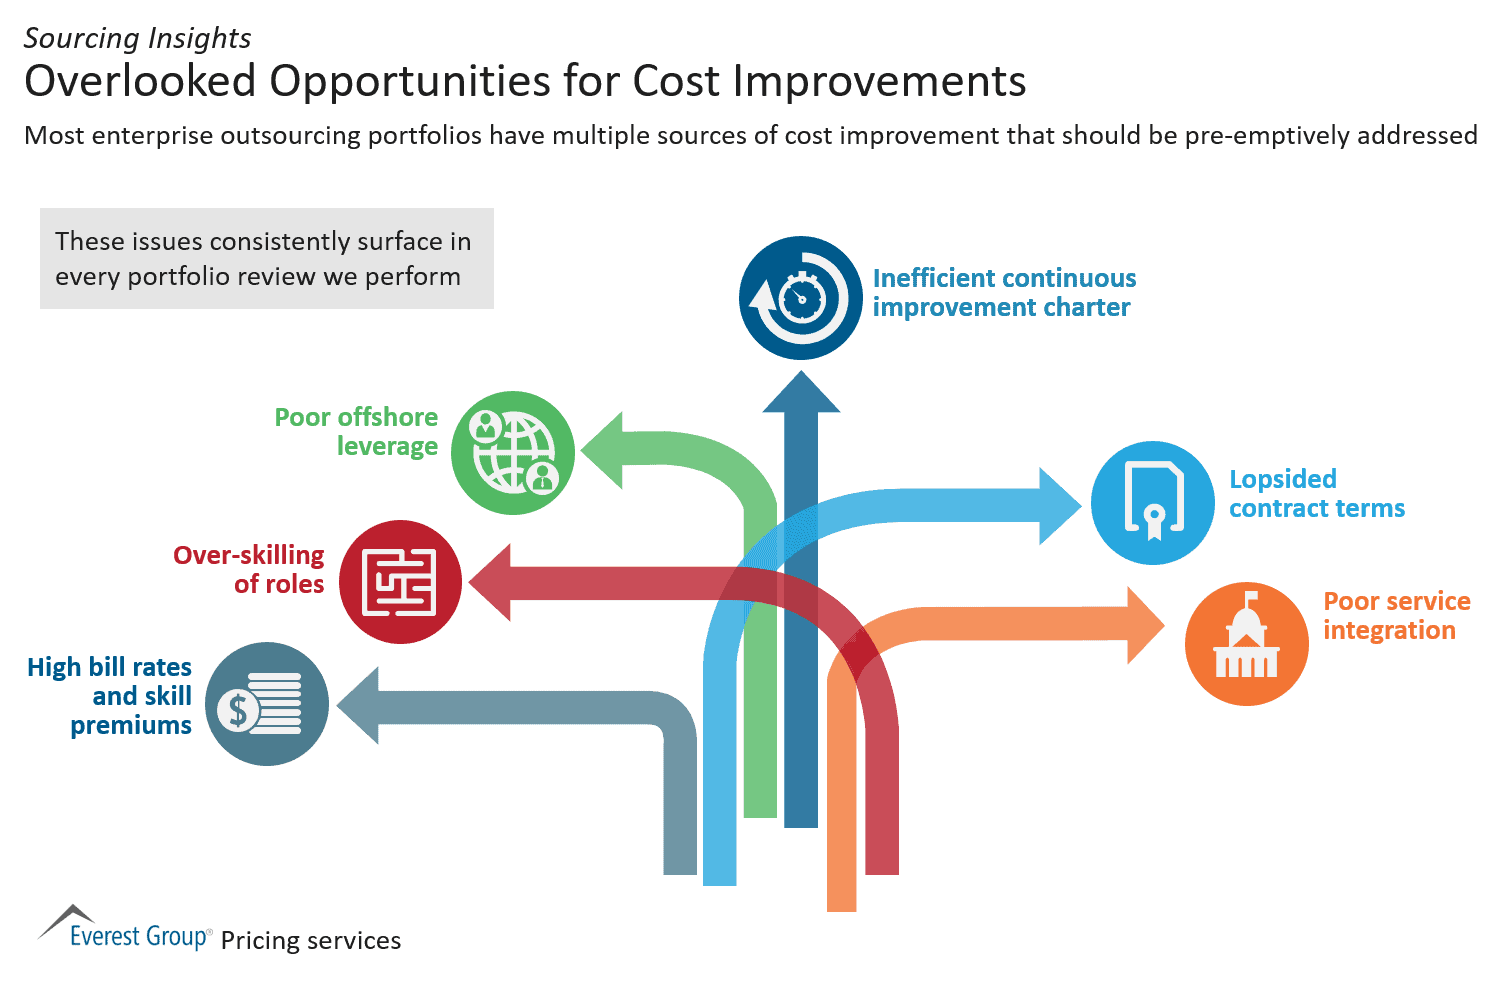 Overlooked Opportunities for Cost Improvements